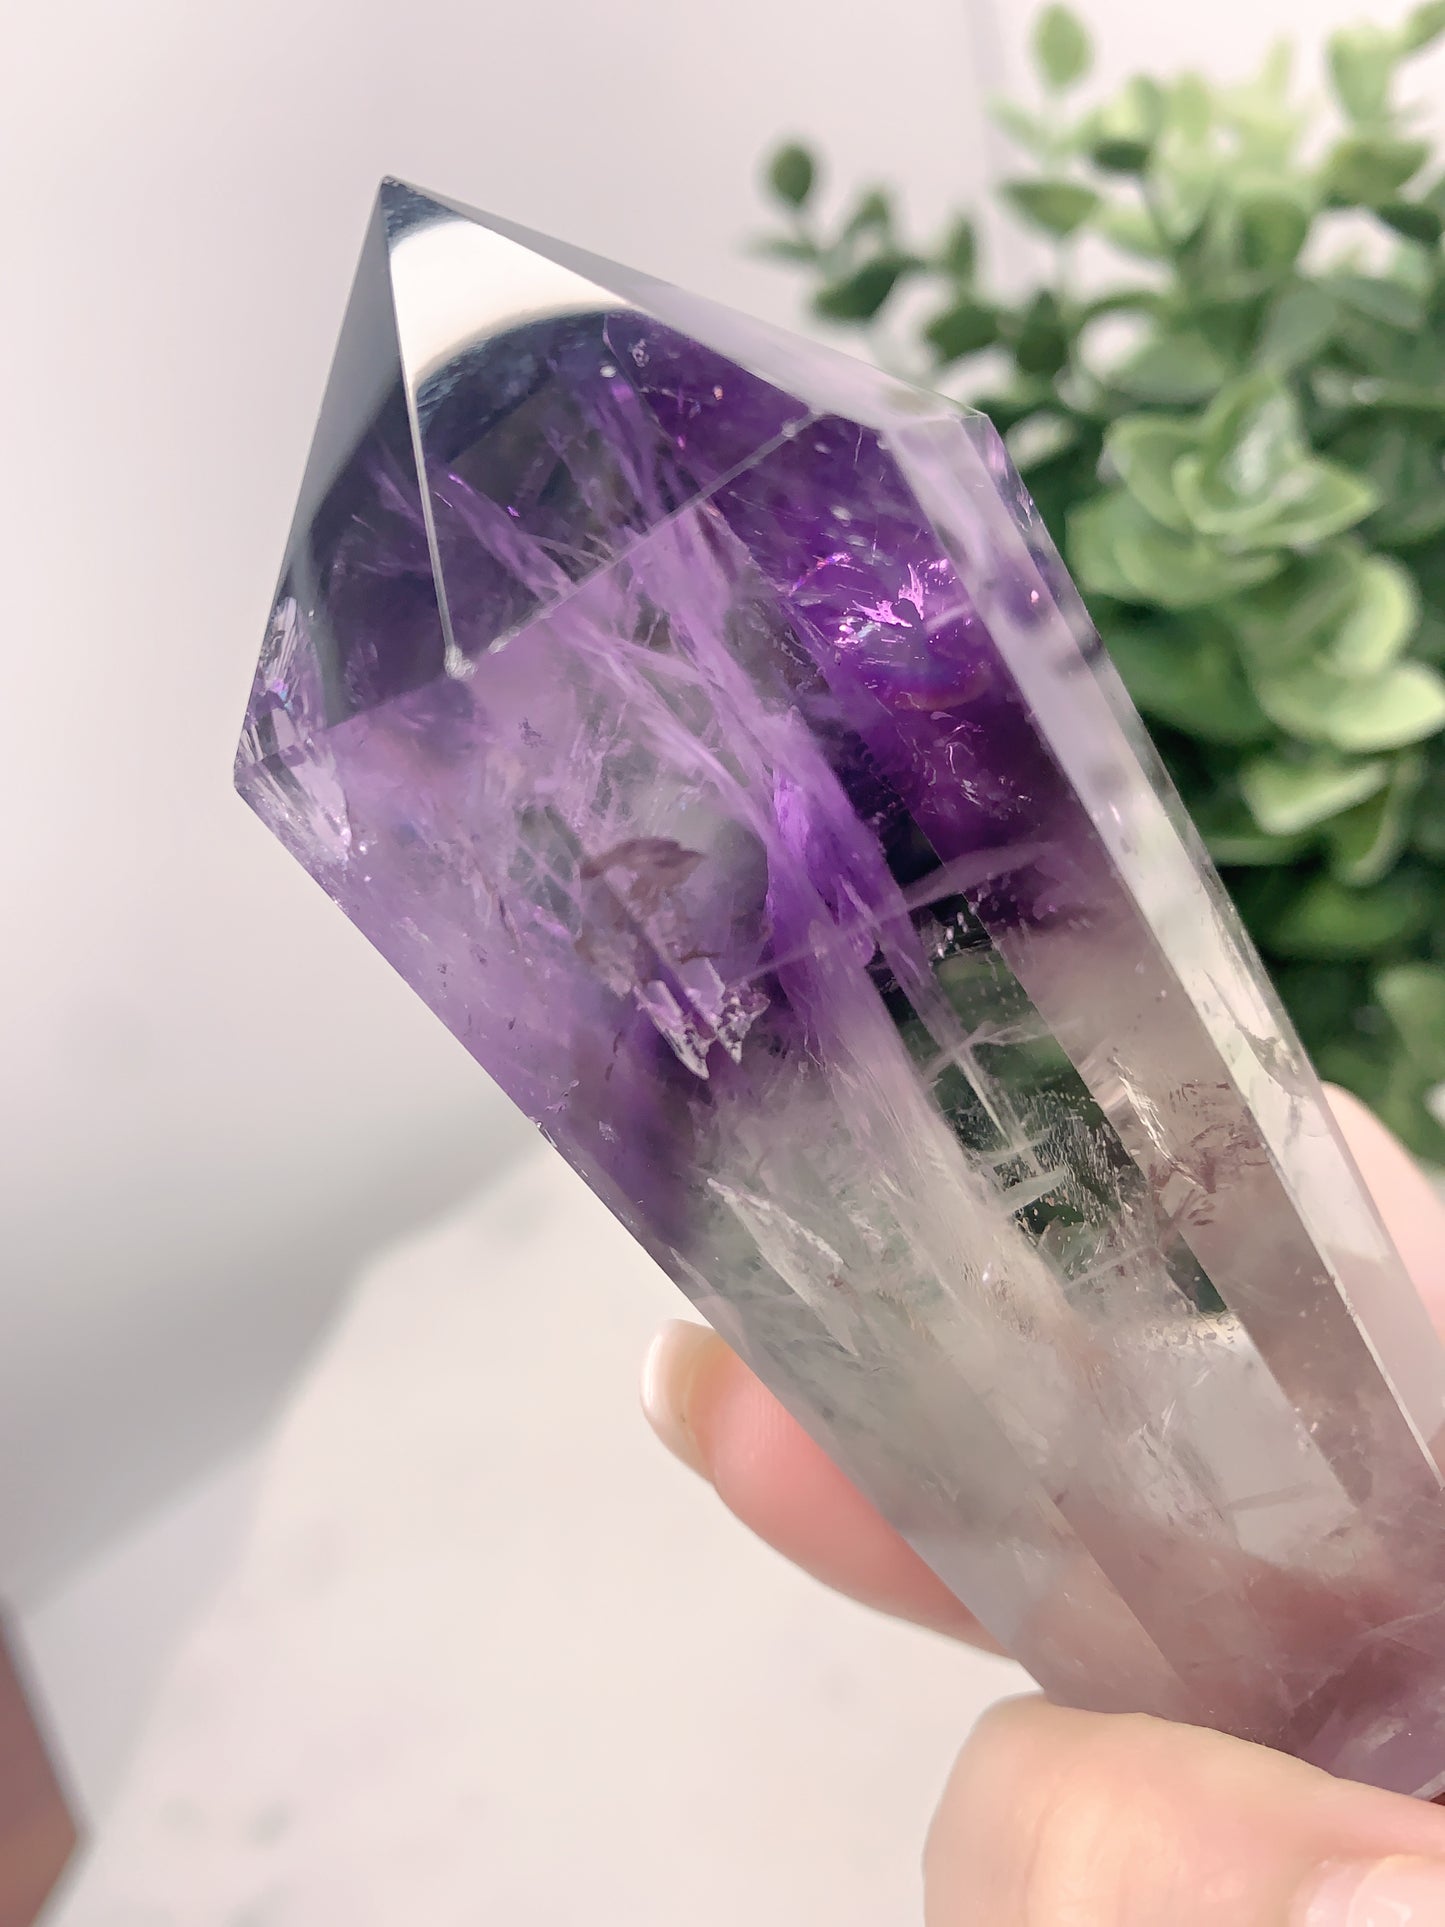 POLISHED AMETHYST ROOT/WAND